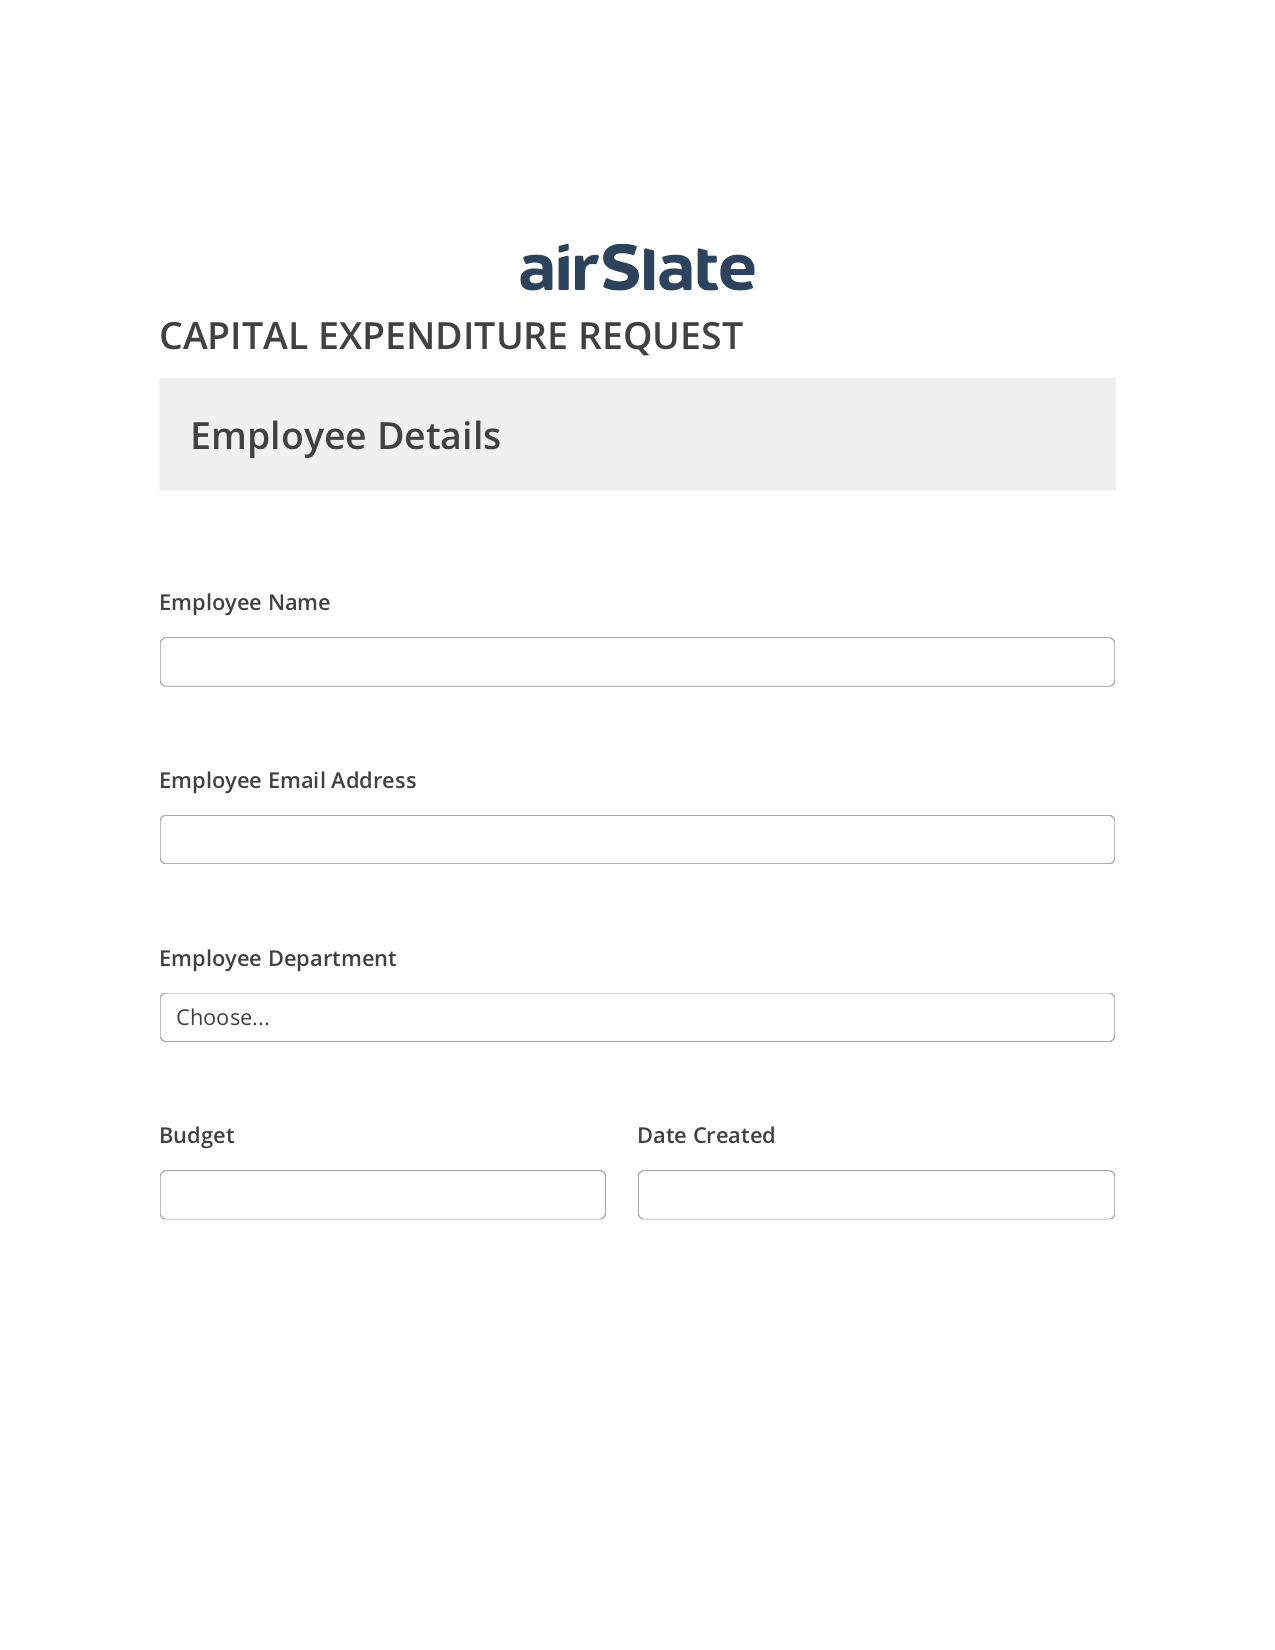 Multirole Capital Expenditure Request Approval Workflow Pre-fill Slate from MS Dynamics 365 record, Google Sheet Two-Way Binding Bot, Export to WebMerge Bot